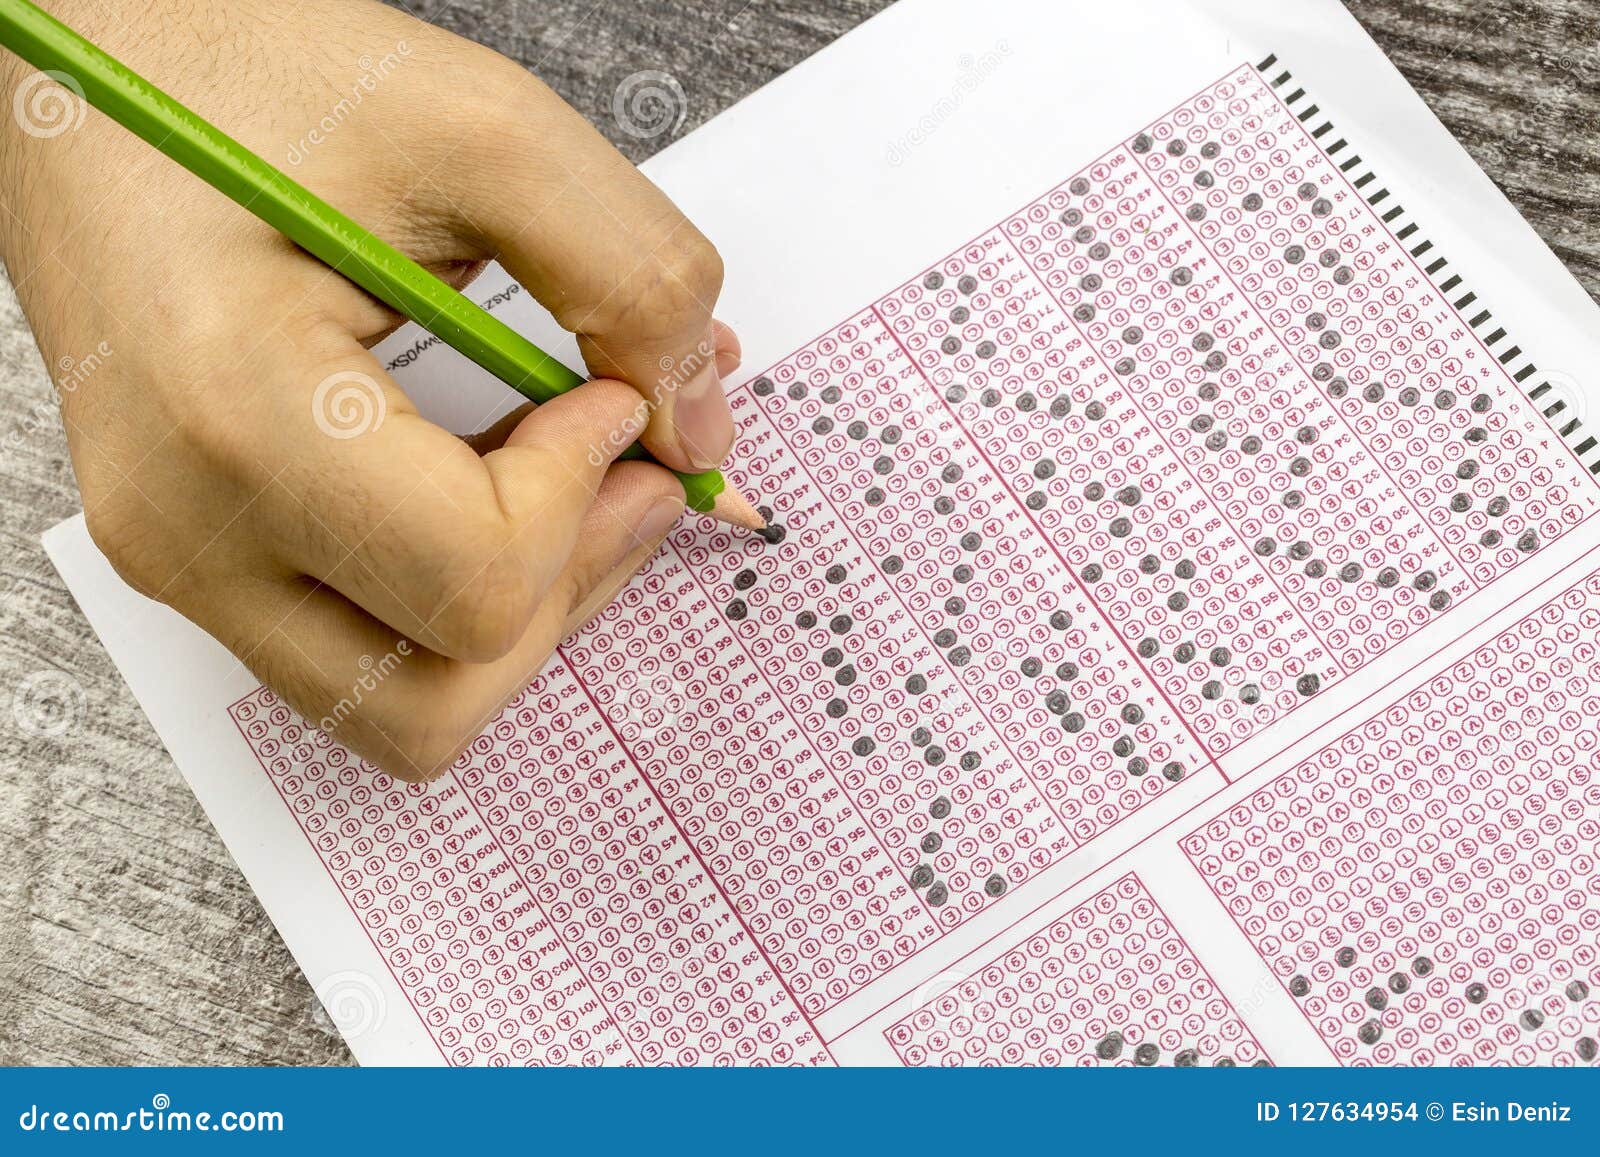 exams-quiz-test-paper-with-pencil-drawing-stock-photo-image-of-check-class-127634954